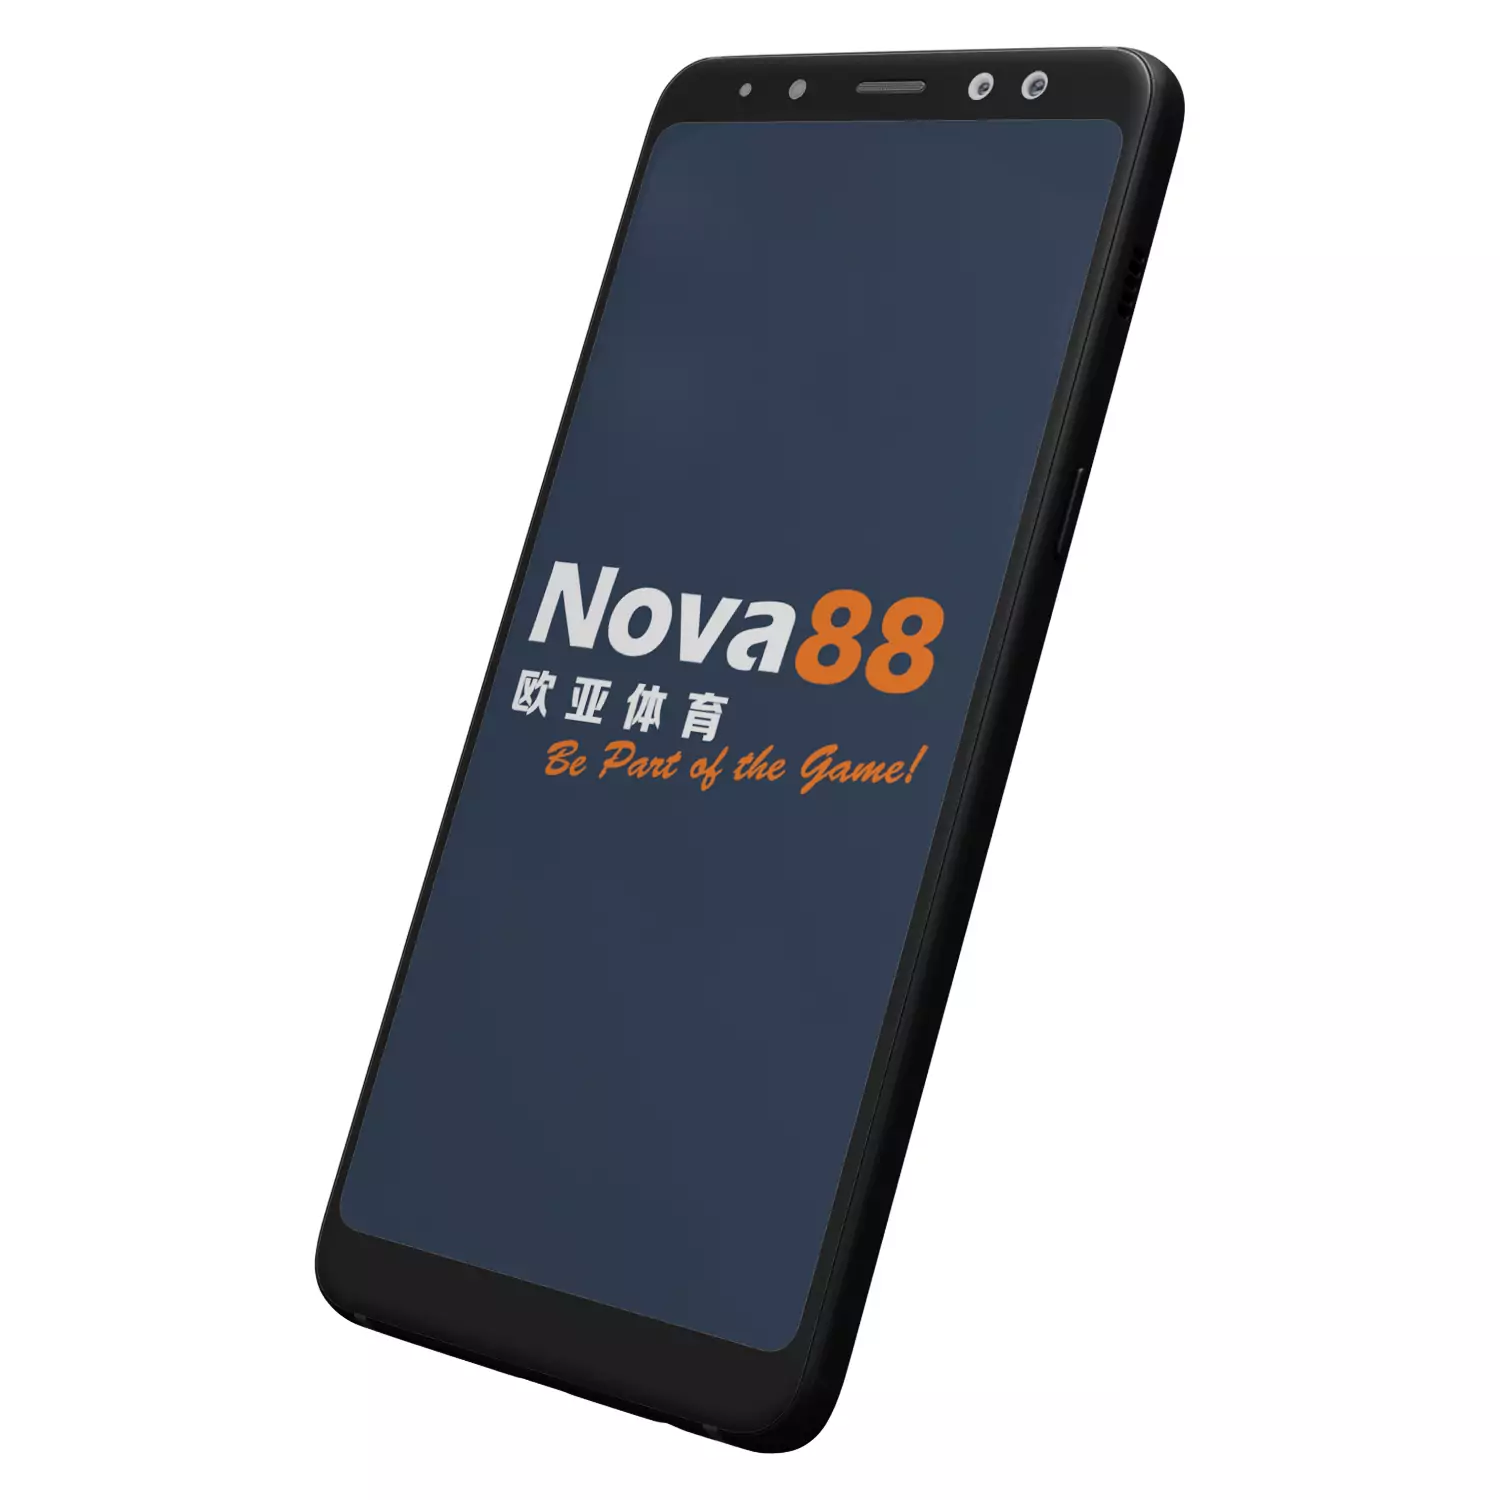 The official Nova88 app is available for Android.